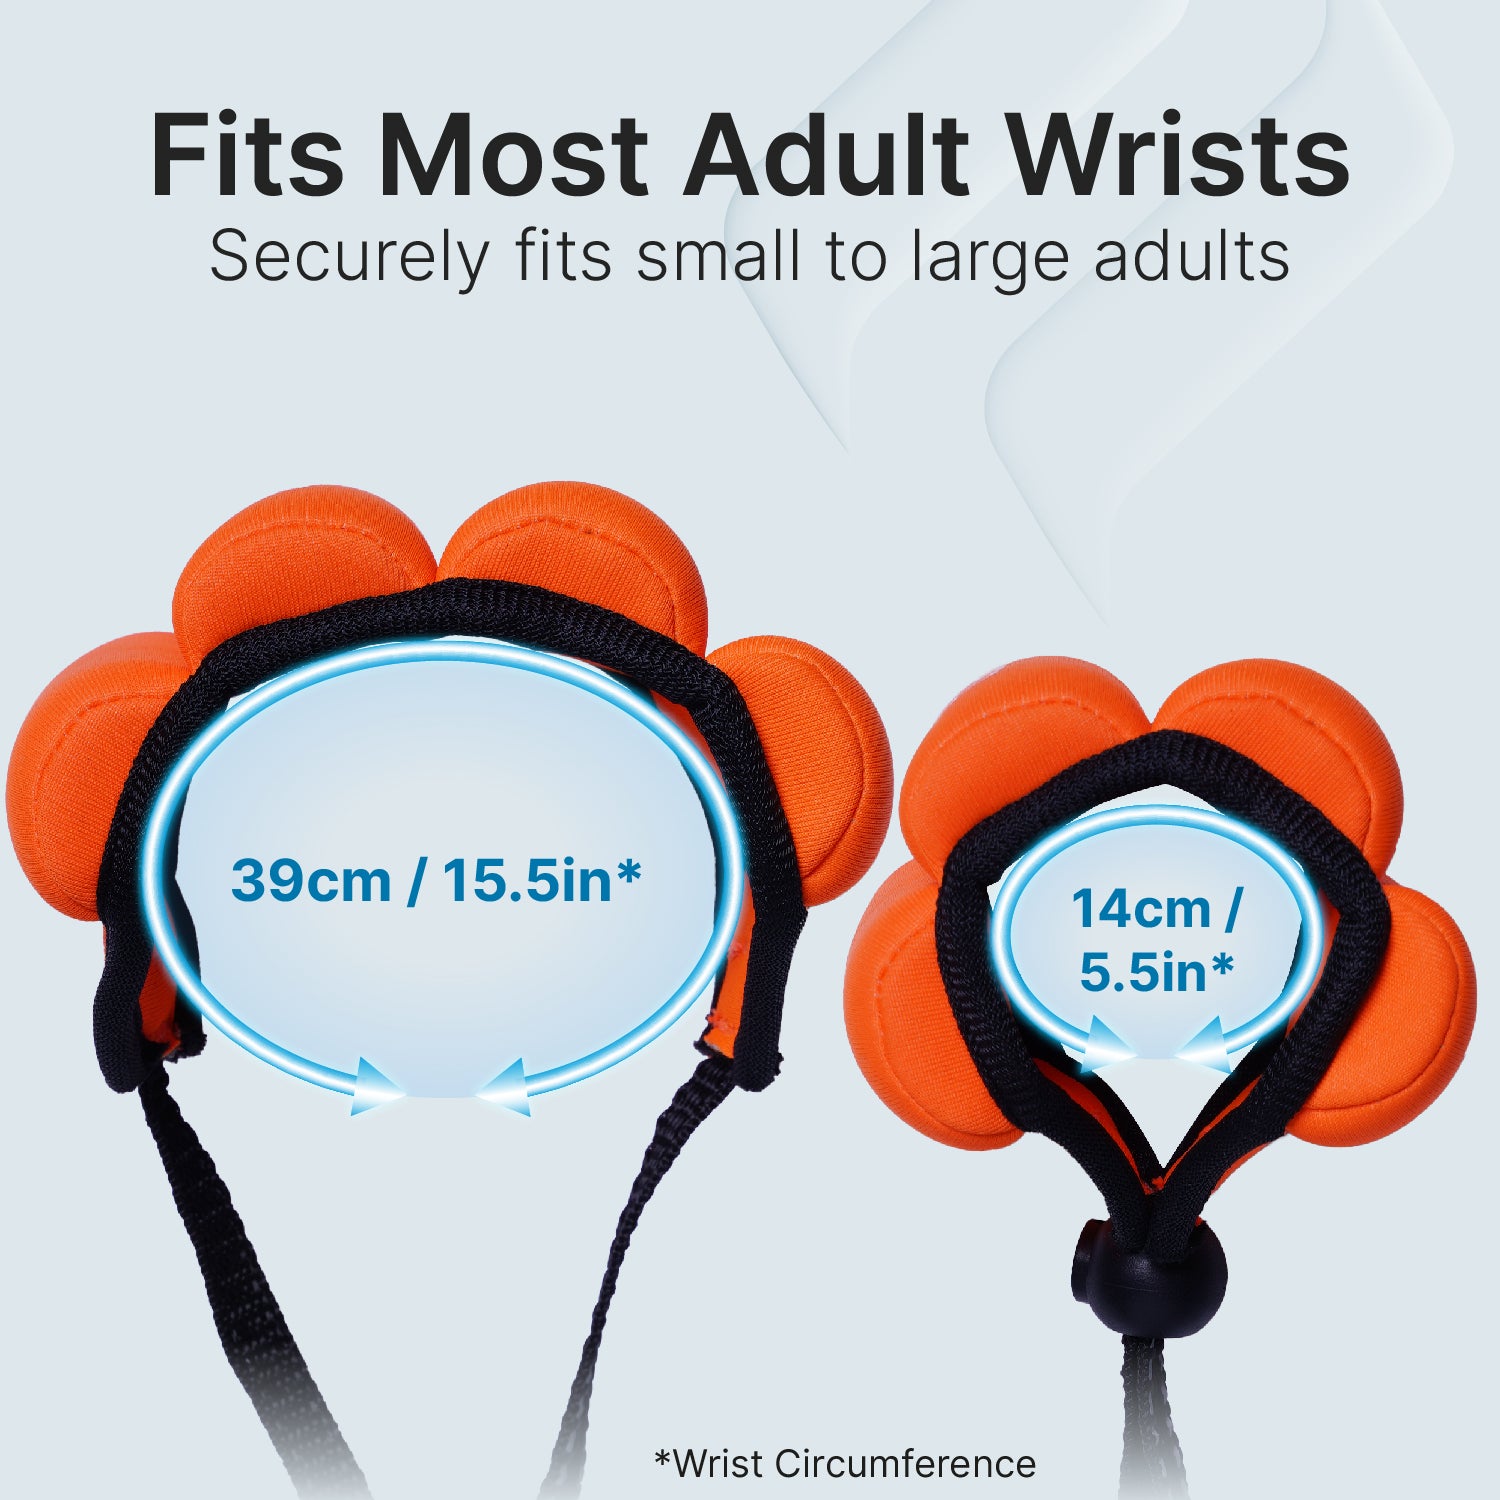 Catalyst orange floating wrist lanyard circumference 5.5in to 15.5in Text reads fits most adult wrists securely fits small to large adults